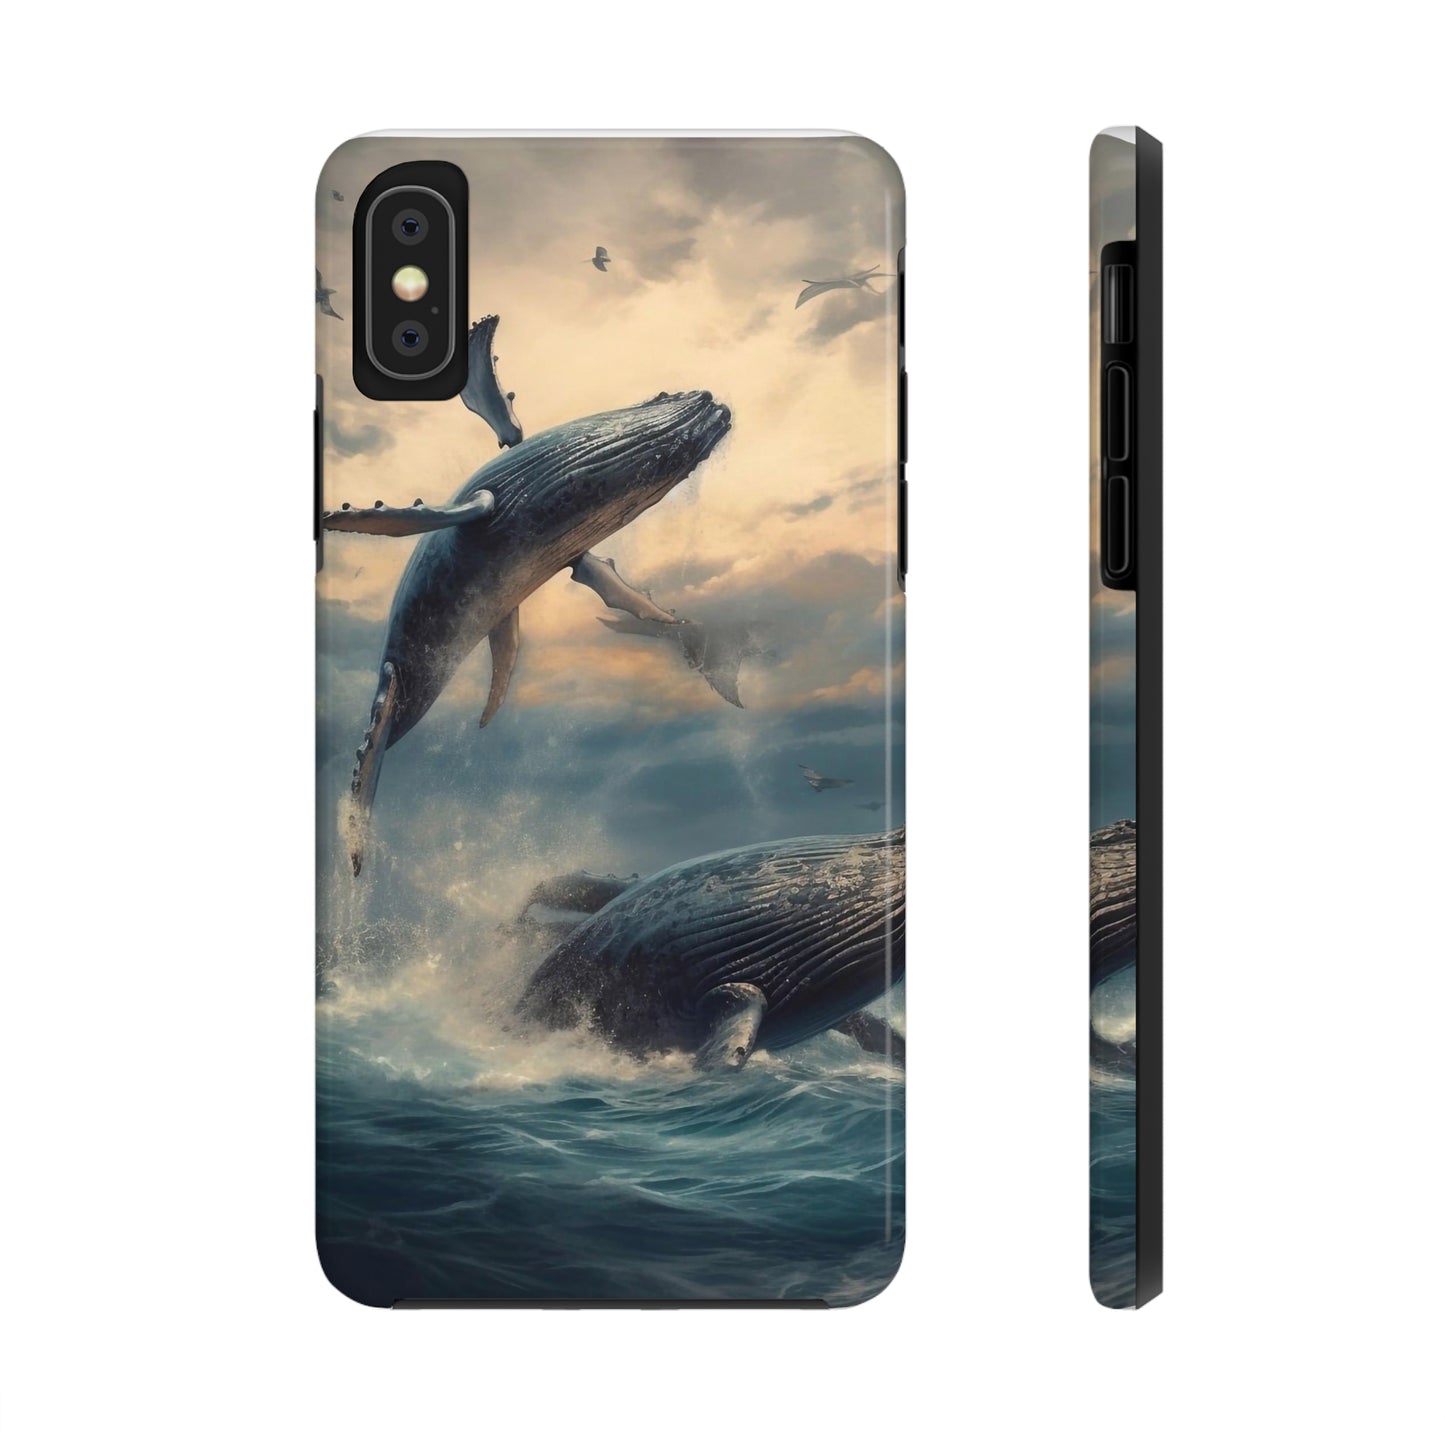 The whale chaos - Tough Phone Cases